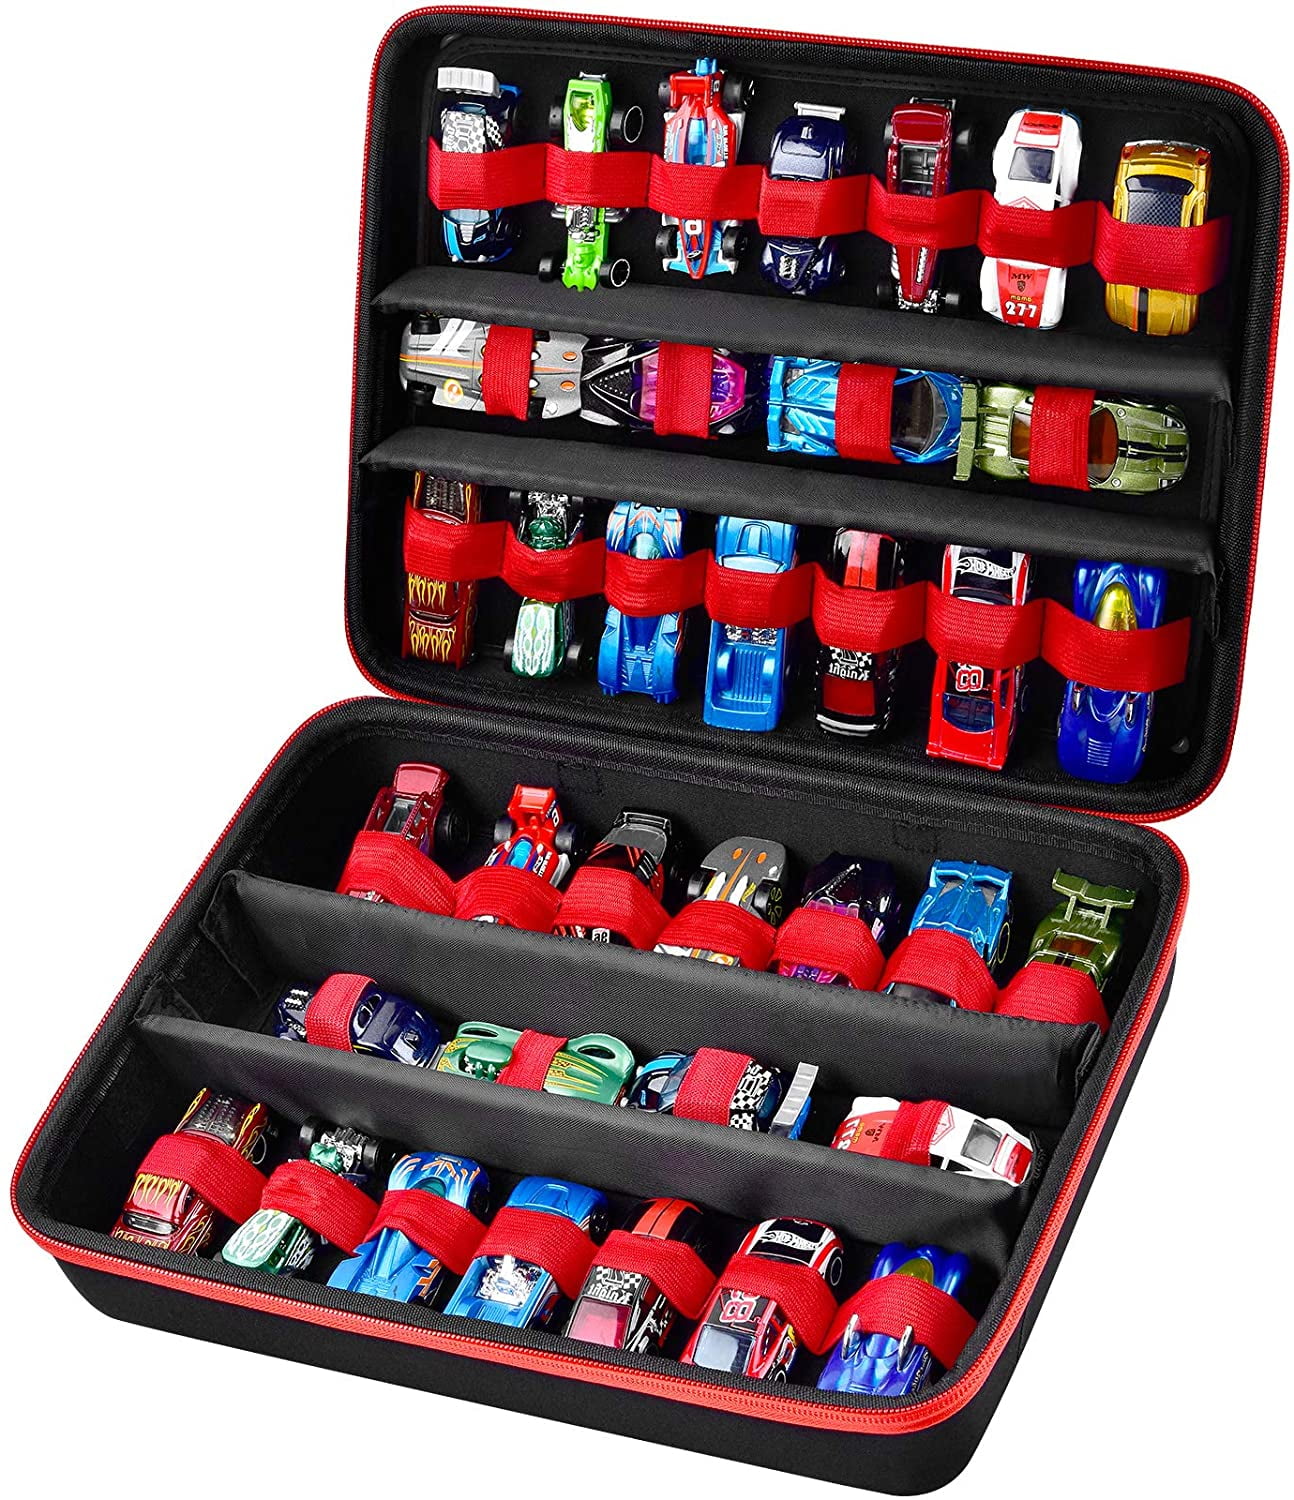 Adam Case Compatible with Hot Wheels Cars Gift Pack. Toy Cars Organizer Storage Container Holds for Hot Wheels Car 20pcs. Display Carrying Holder